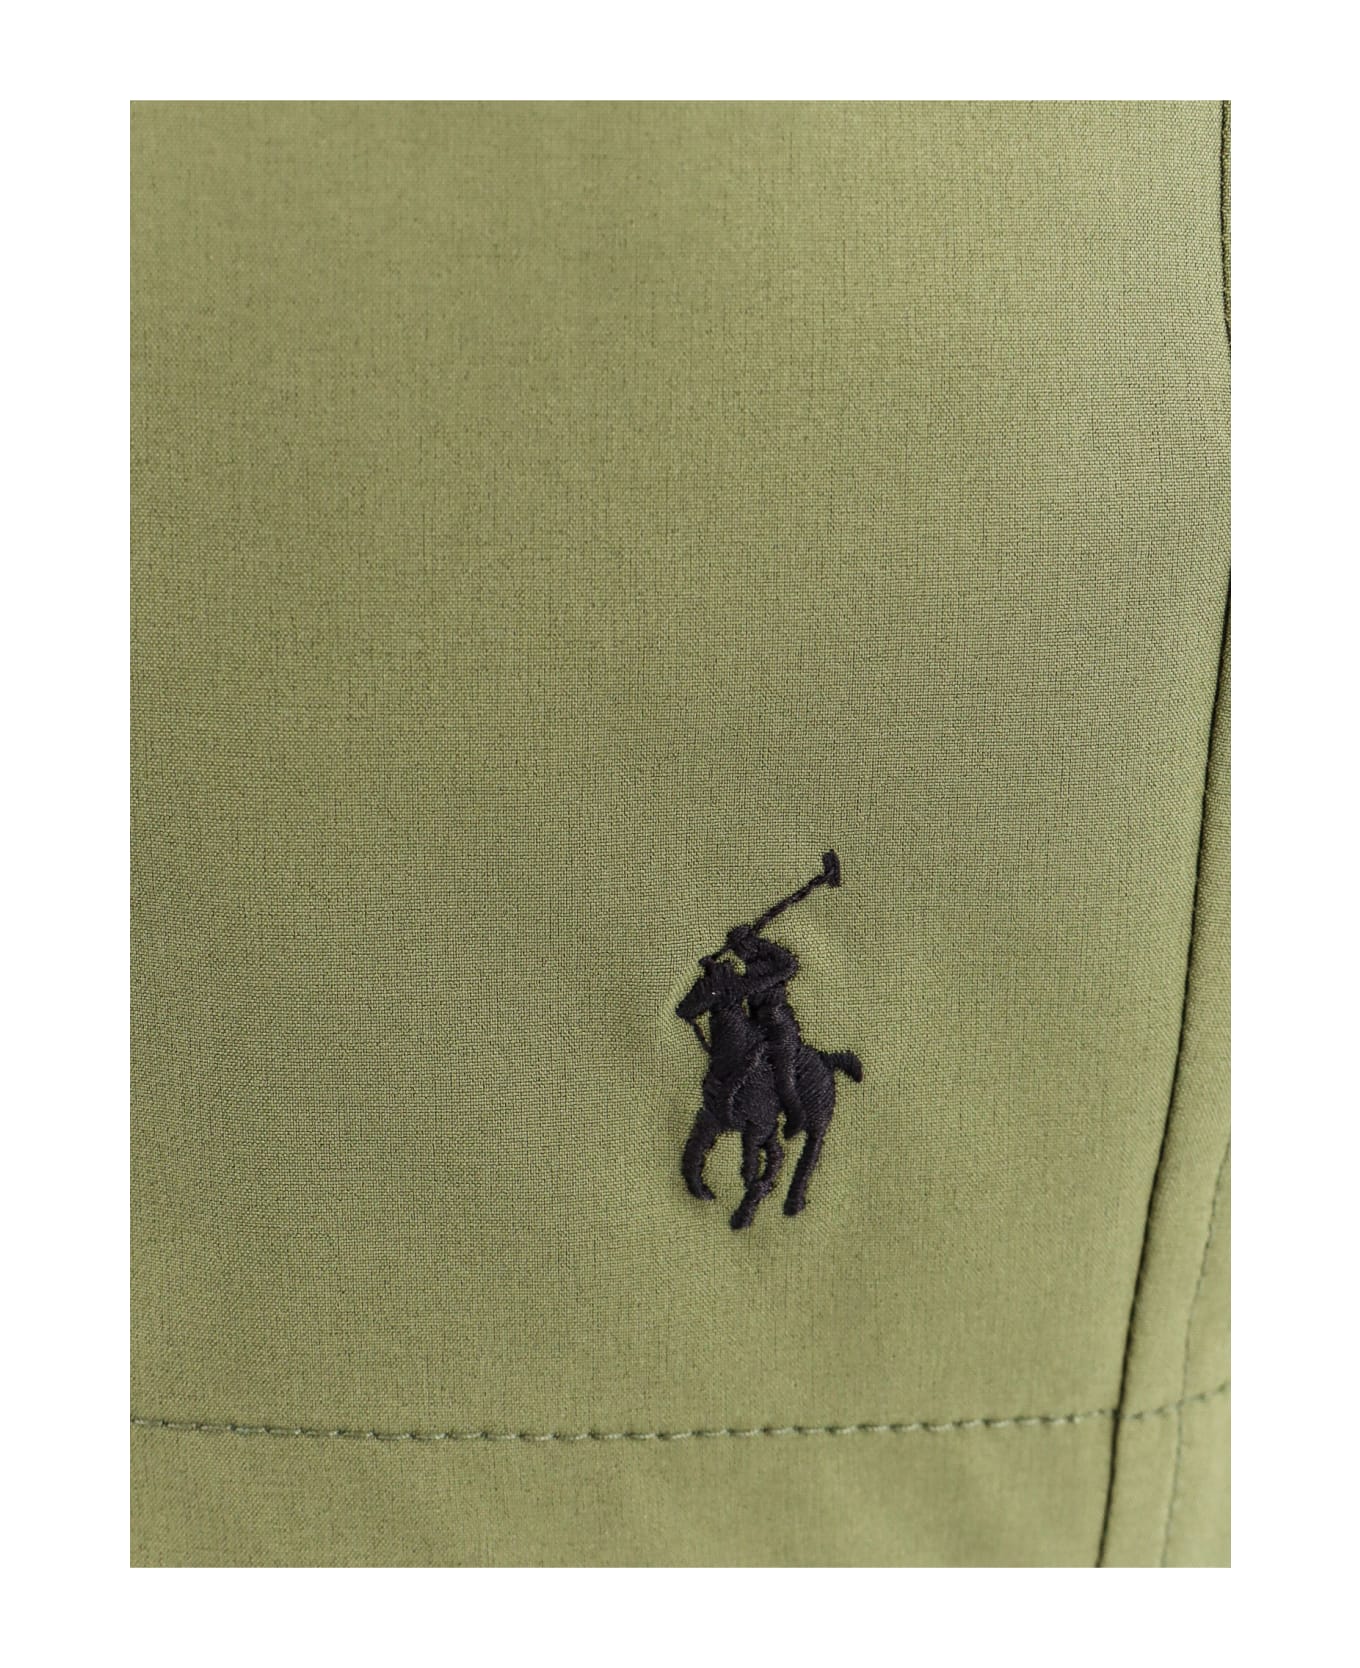 Polo Ralph Lauren Olive Green Swim Shorts With Embroidered Pony - TREEGREEN 水着